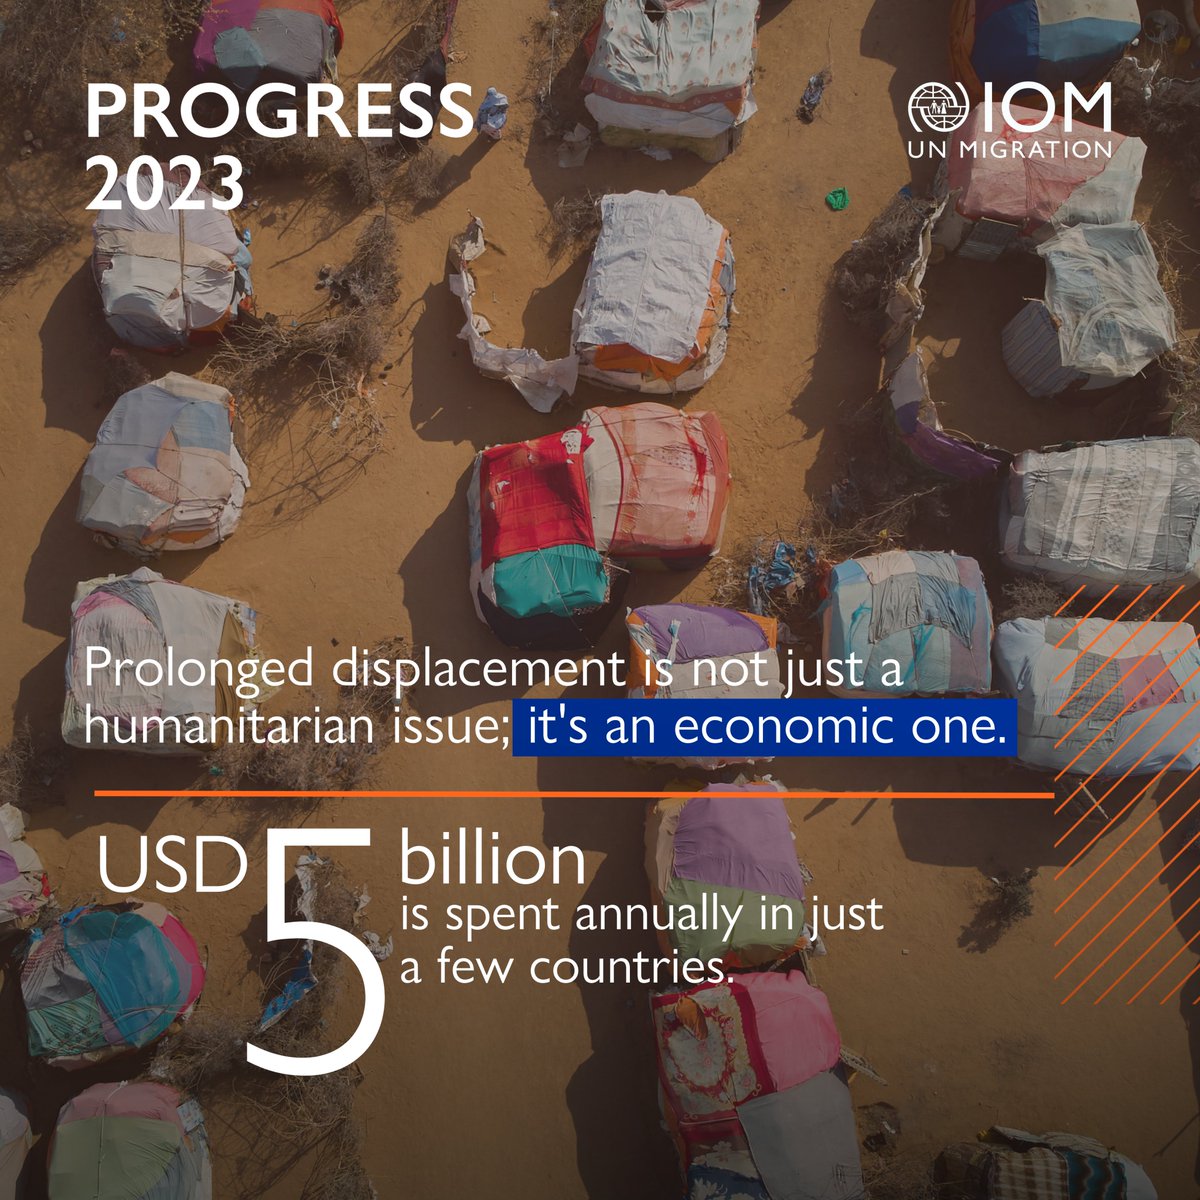 📈 In 2022, disasters in 15 countries caused 3X more global displacement than violence. Long-term displacement reduces likelihood of return. More in the Periodic Global Report on the State of Solutions to Internal Displacement: dtm.iom.int/progress #DataForAction #COP28